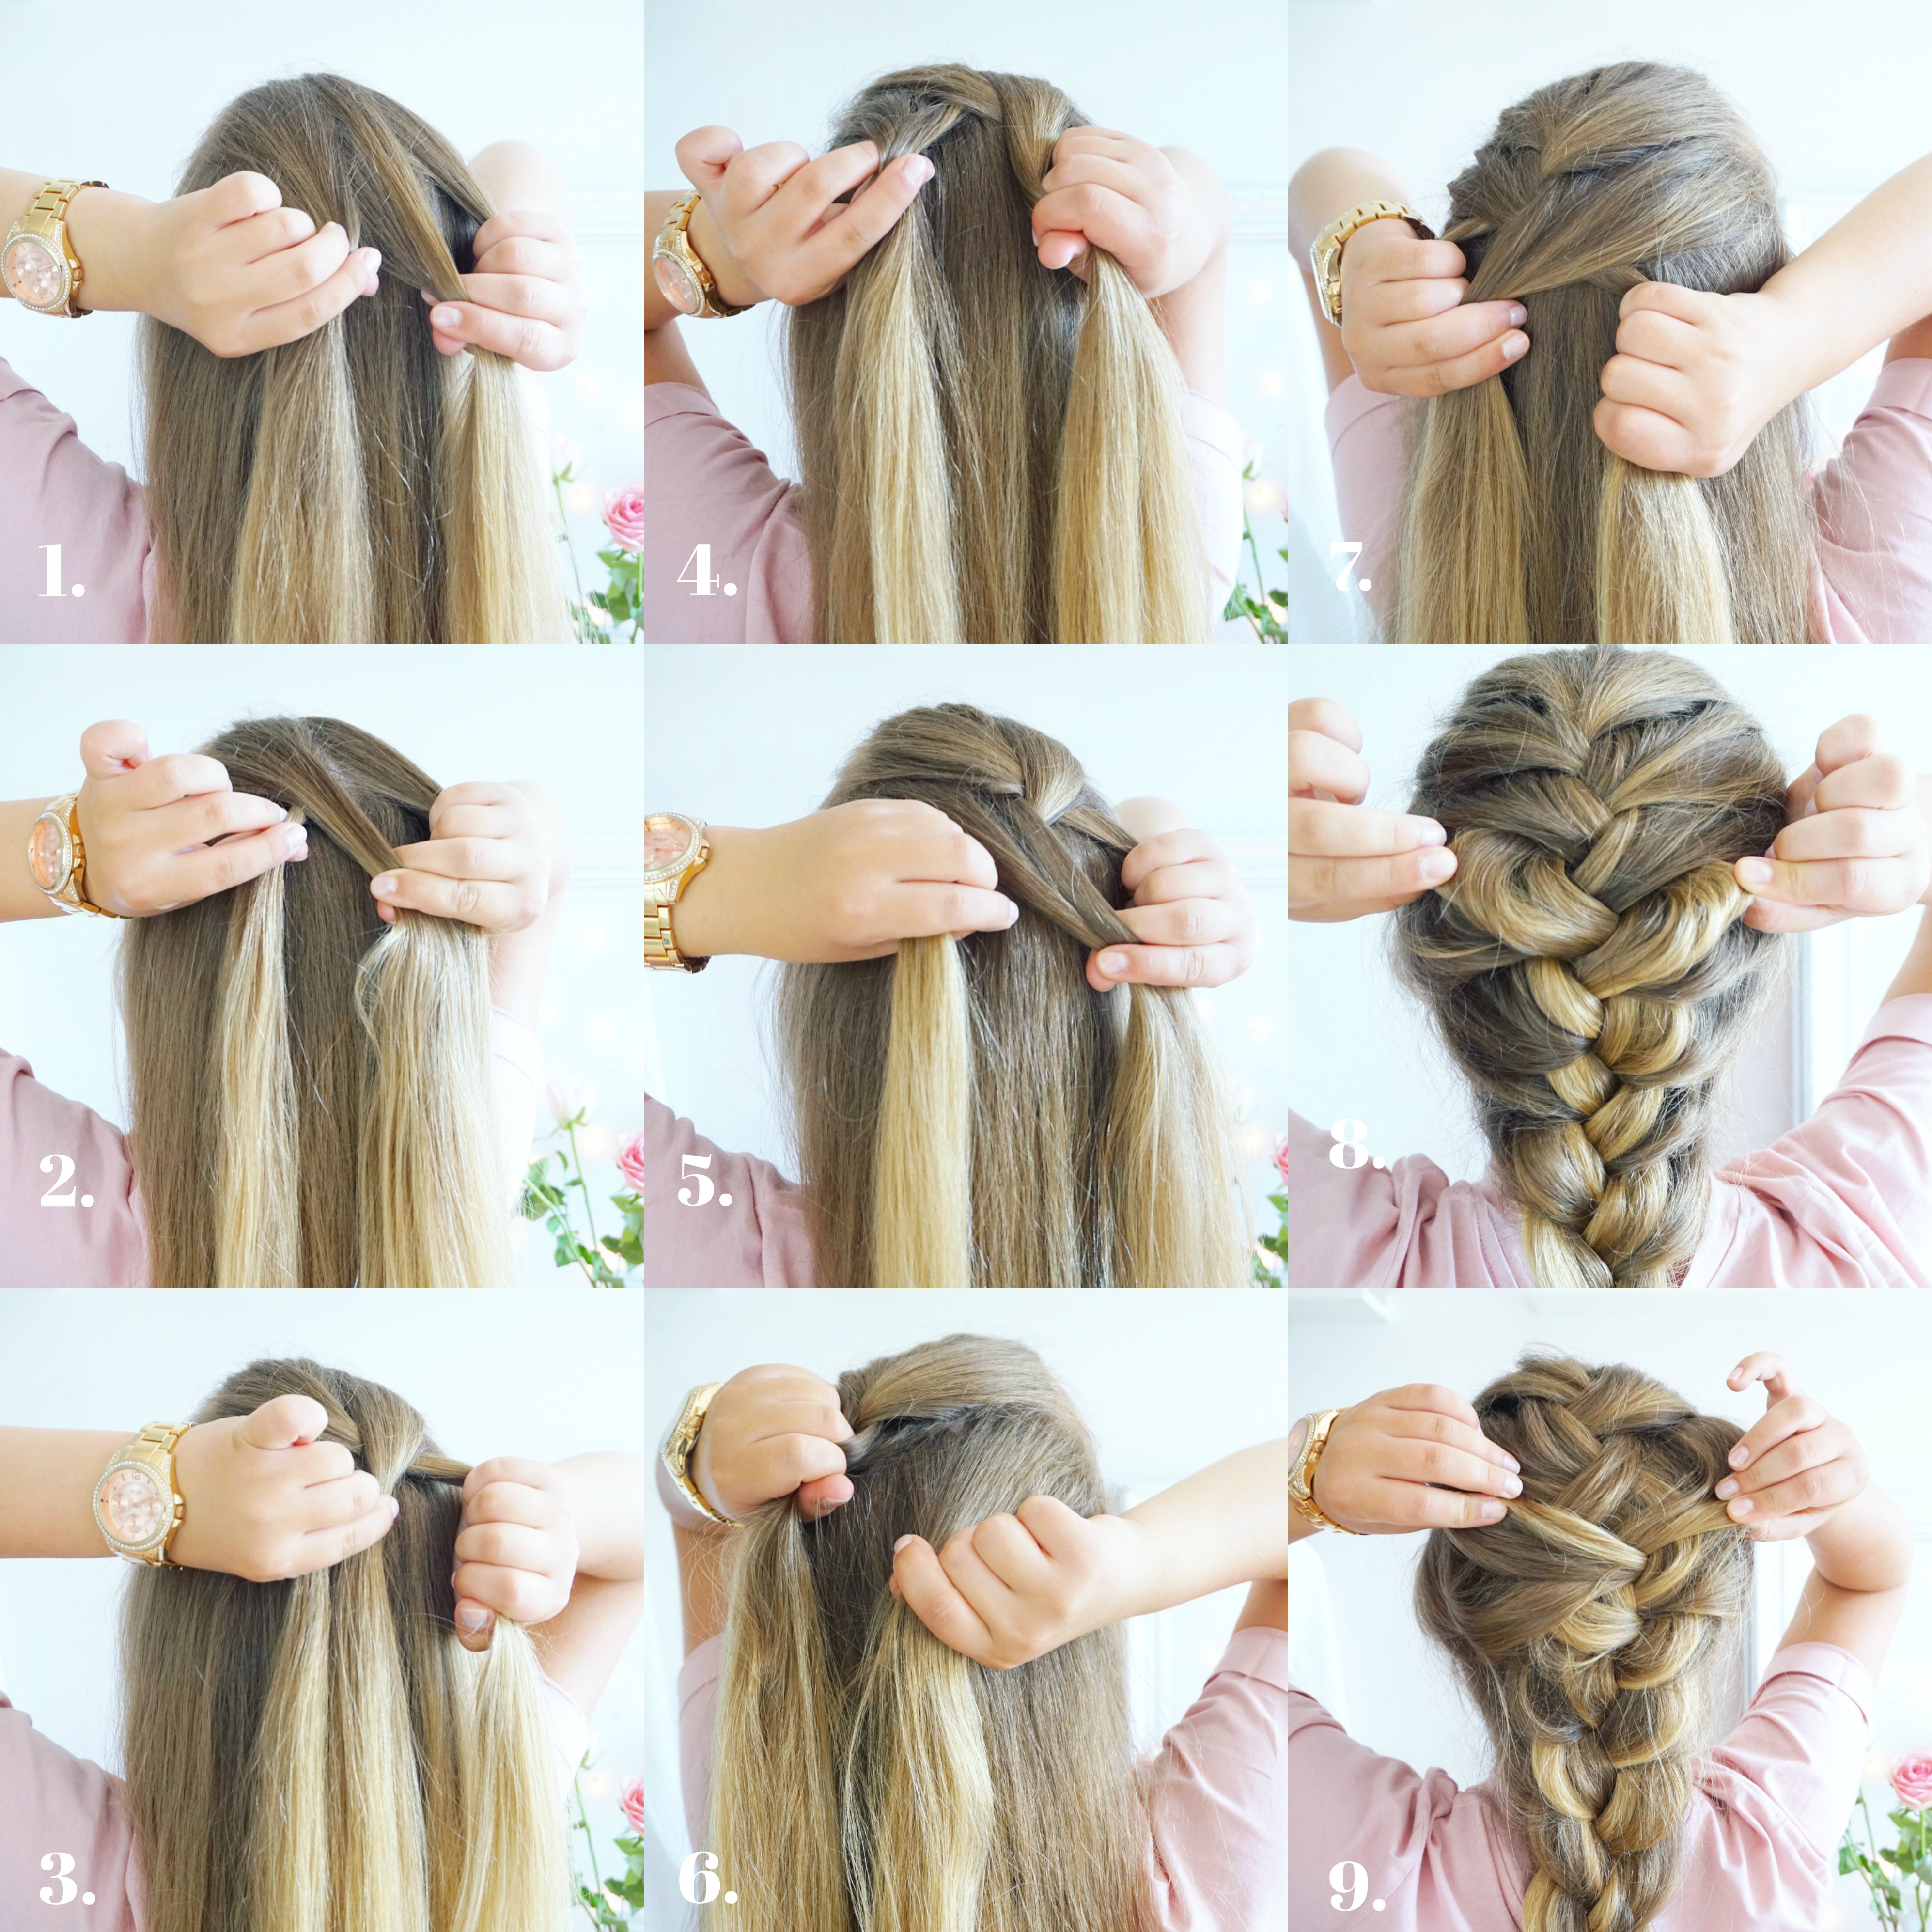 How To Do A French Braid Step By Step For Beginners 